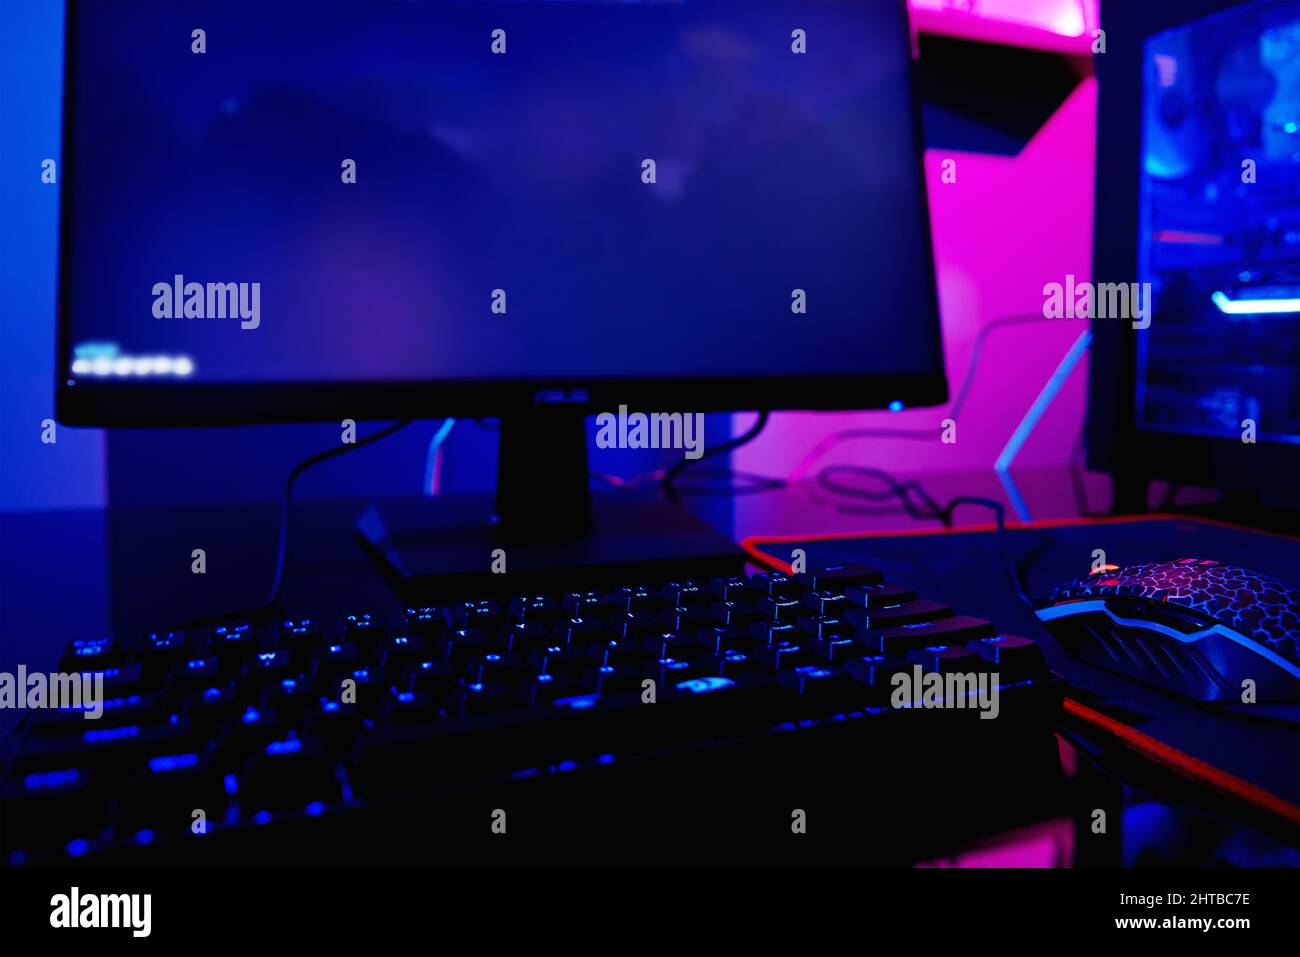 PC with rgb keyboard for gaming computer video games with neon colored background, dark room with game workplace without people Stock Photo